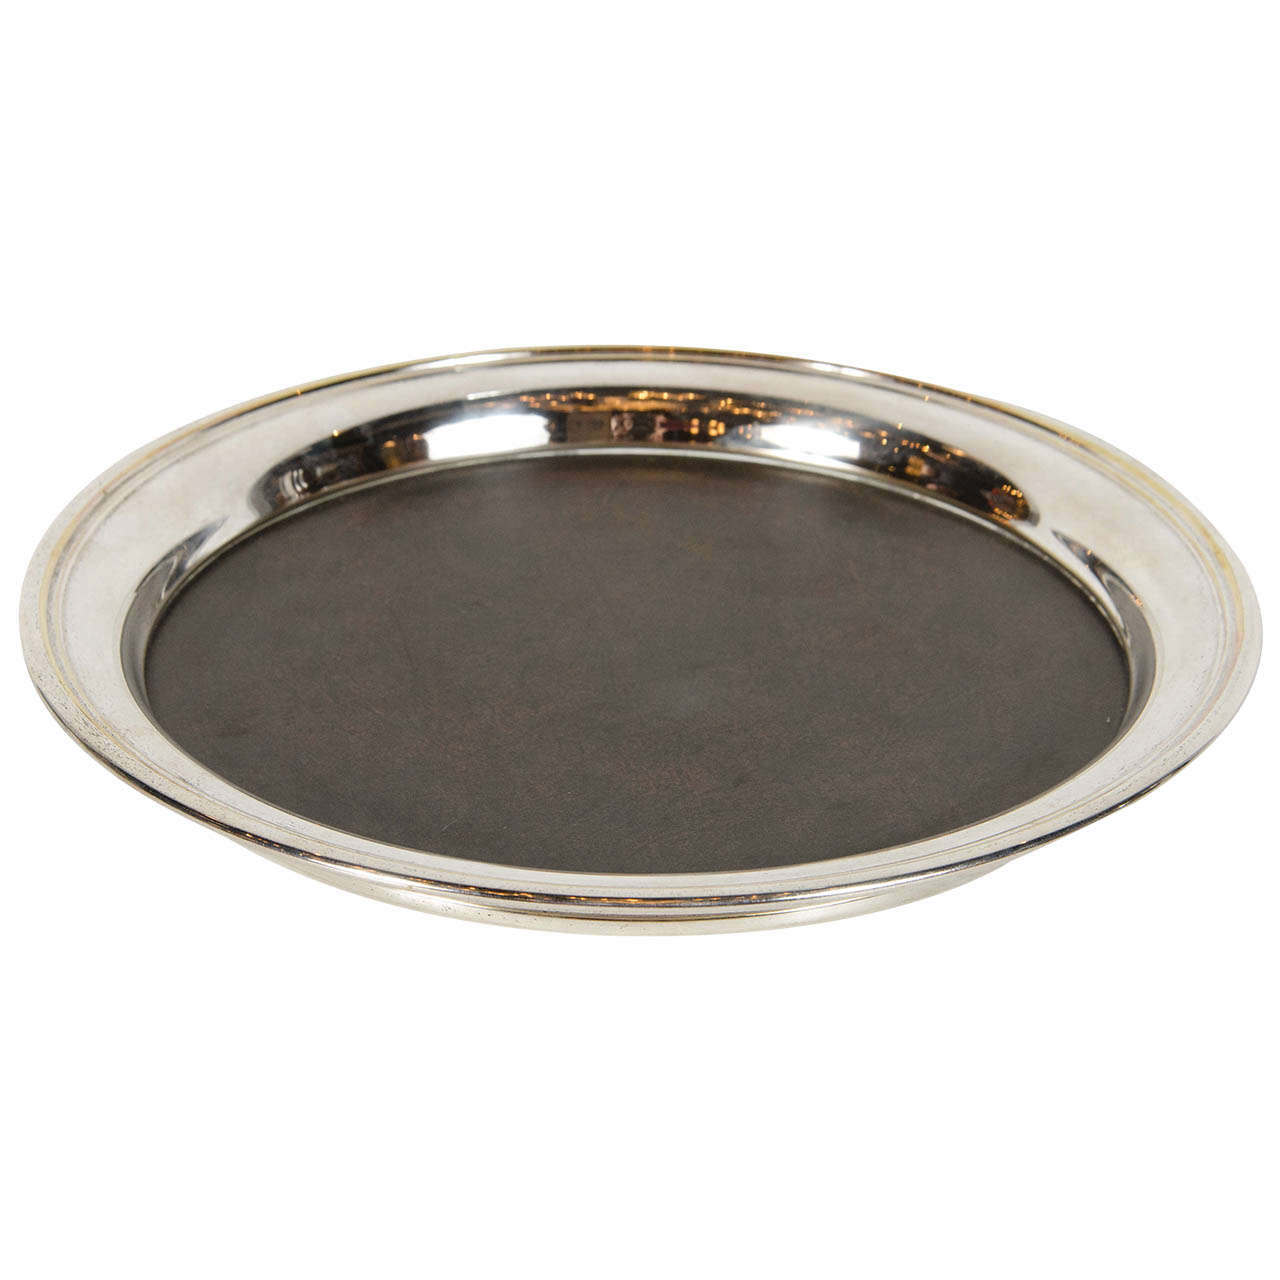 Mid-Century Modern Round Serving or Bar Tray by Crescent in Polished Nickel